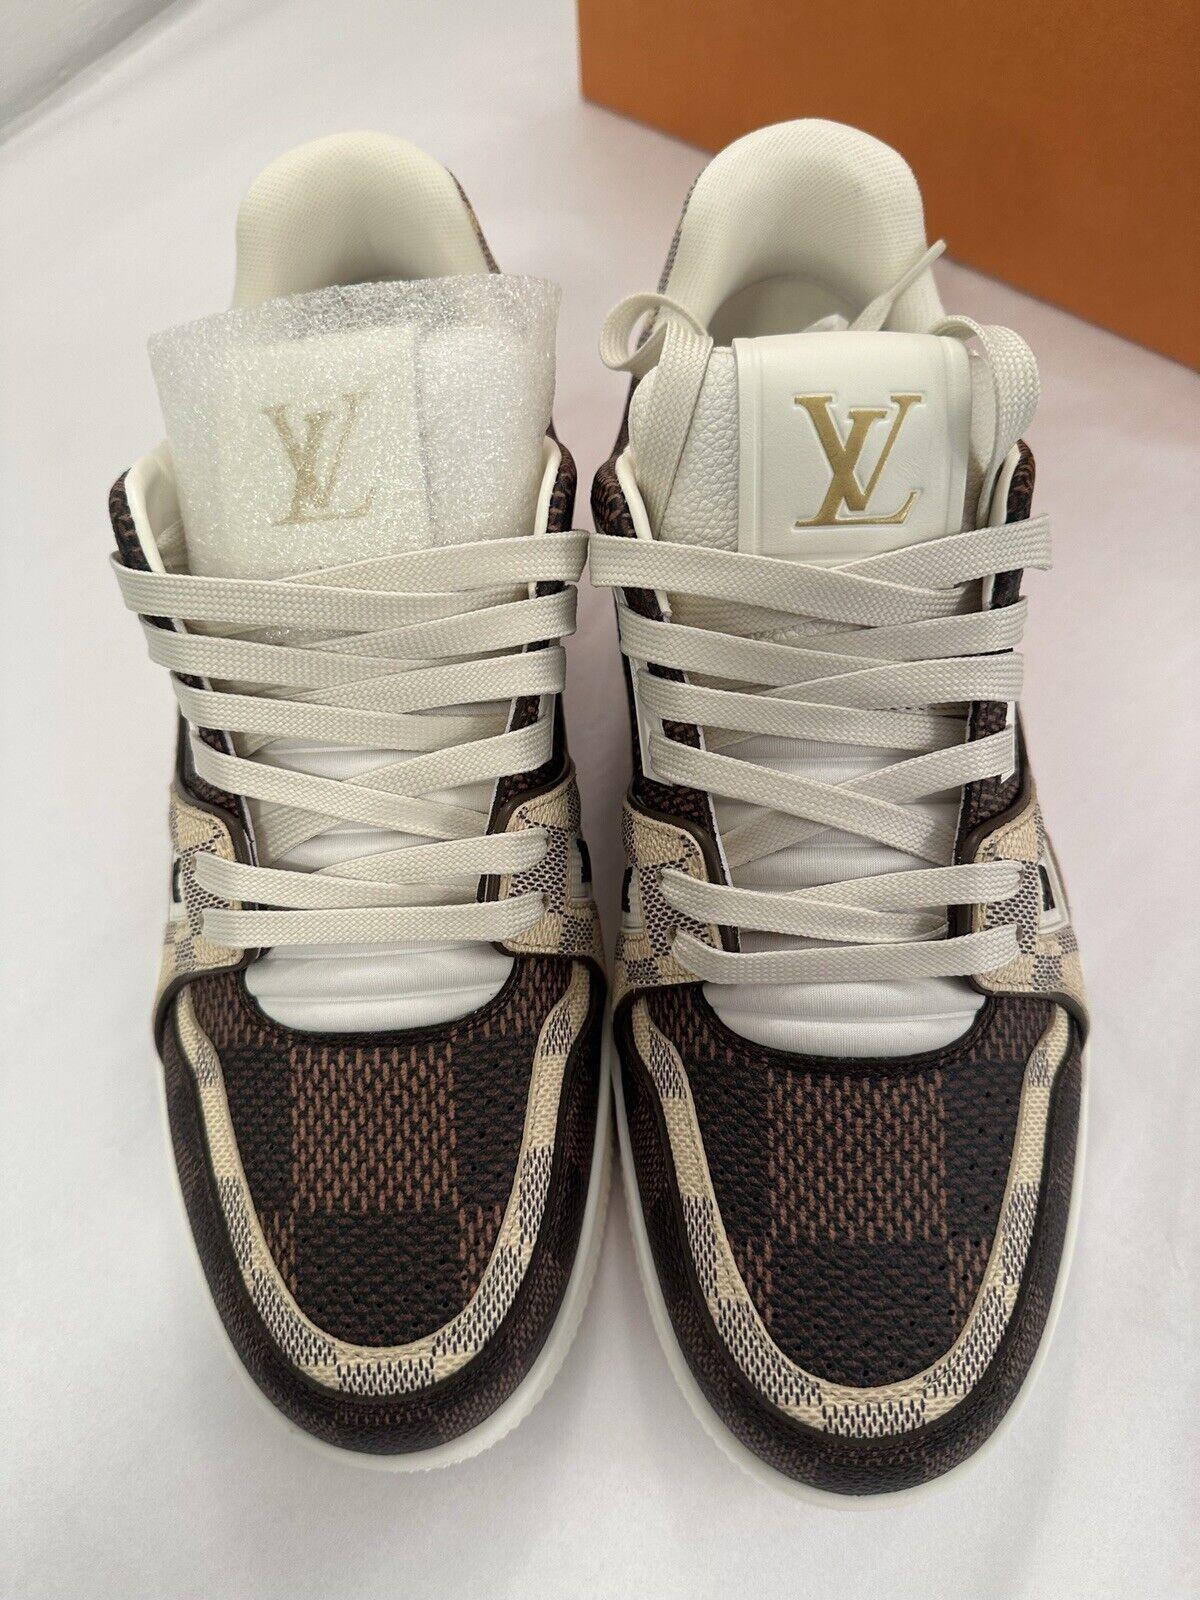 Louis Vuitton 💯 Authentic guaranteed
Louis Vuitton LV trainer Damier brand new size 6 with receipt  ,they are men size 
Sold out!.
New with dust bags,LV store receipt (buyer info will be covered) LV ribbon
Please familiarize yourself with sizing of